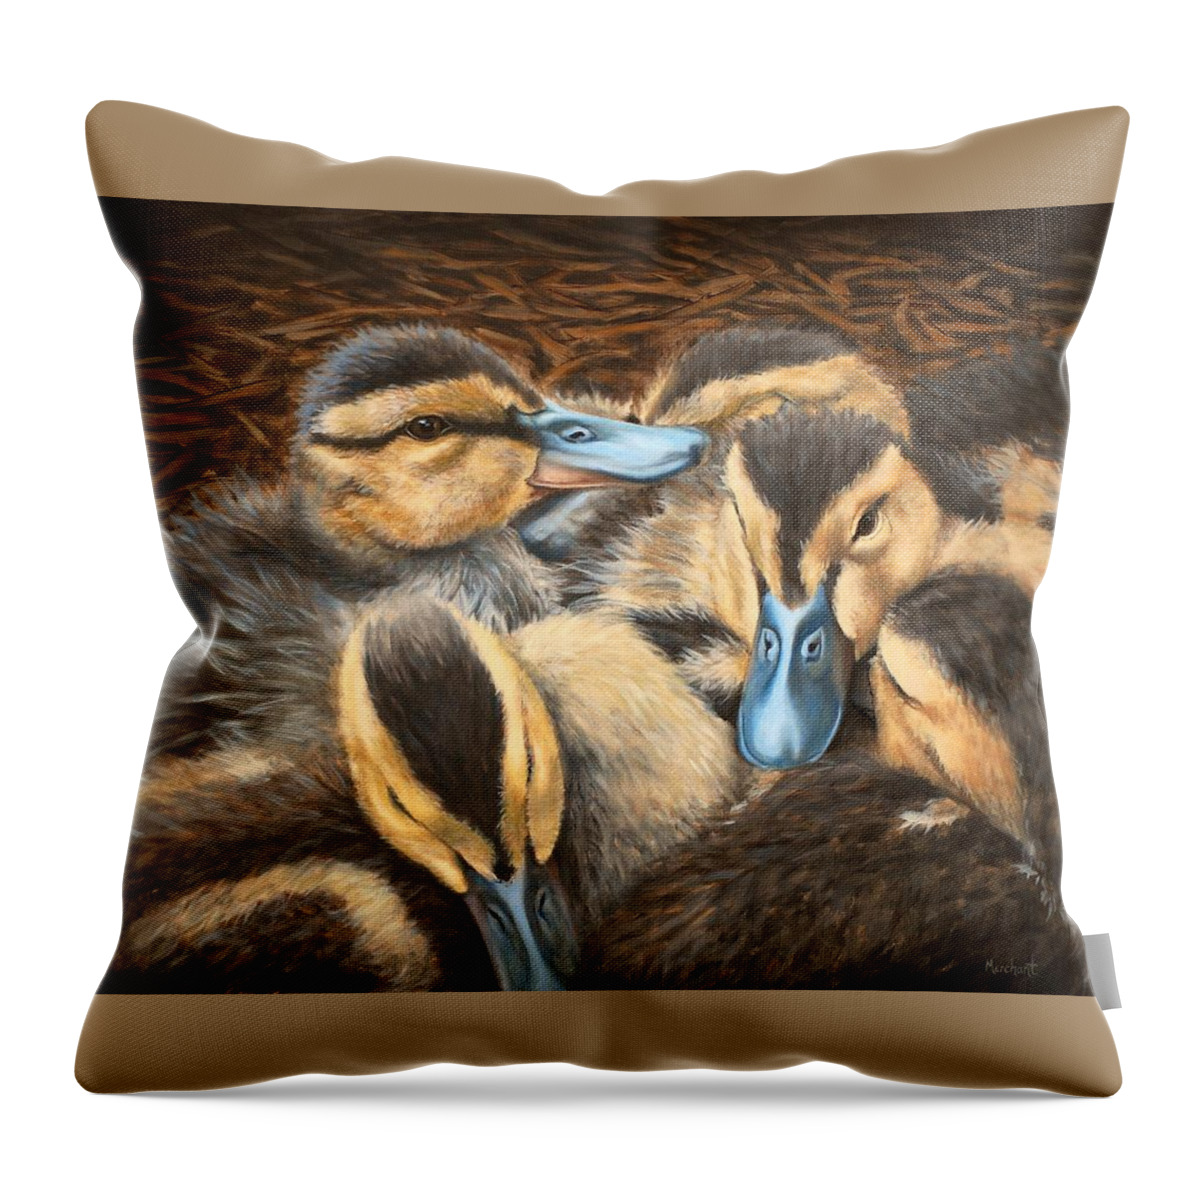 Duck Throw Pillow featuring the painting Pile O' Ducklings by Linda Merchant